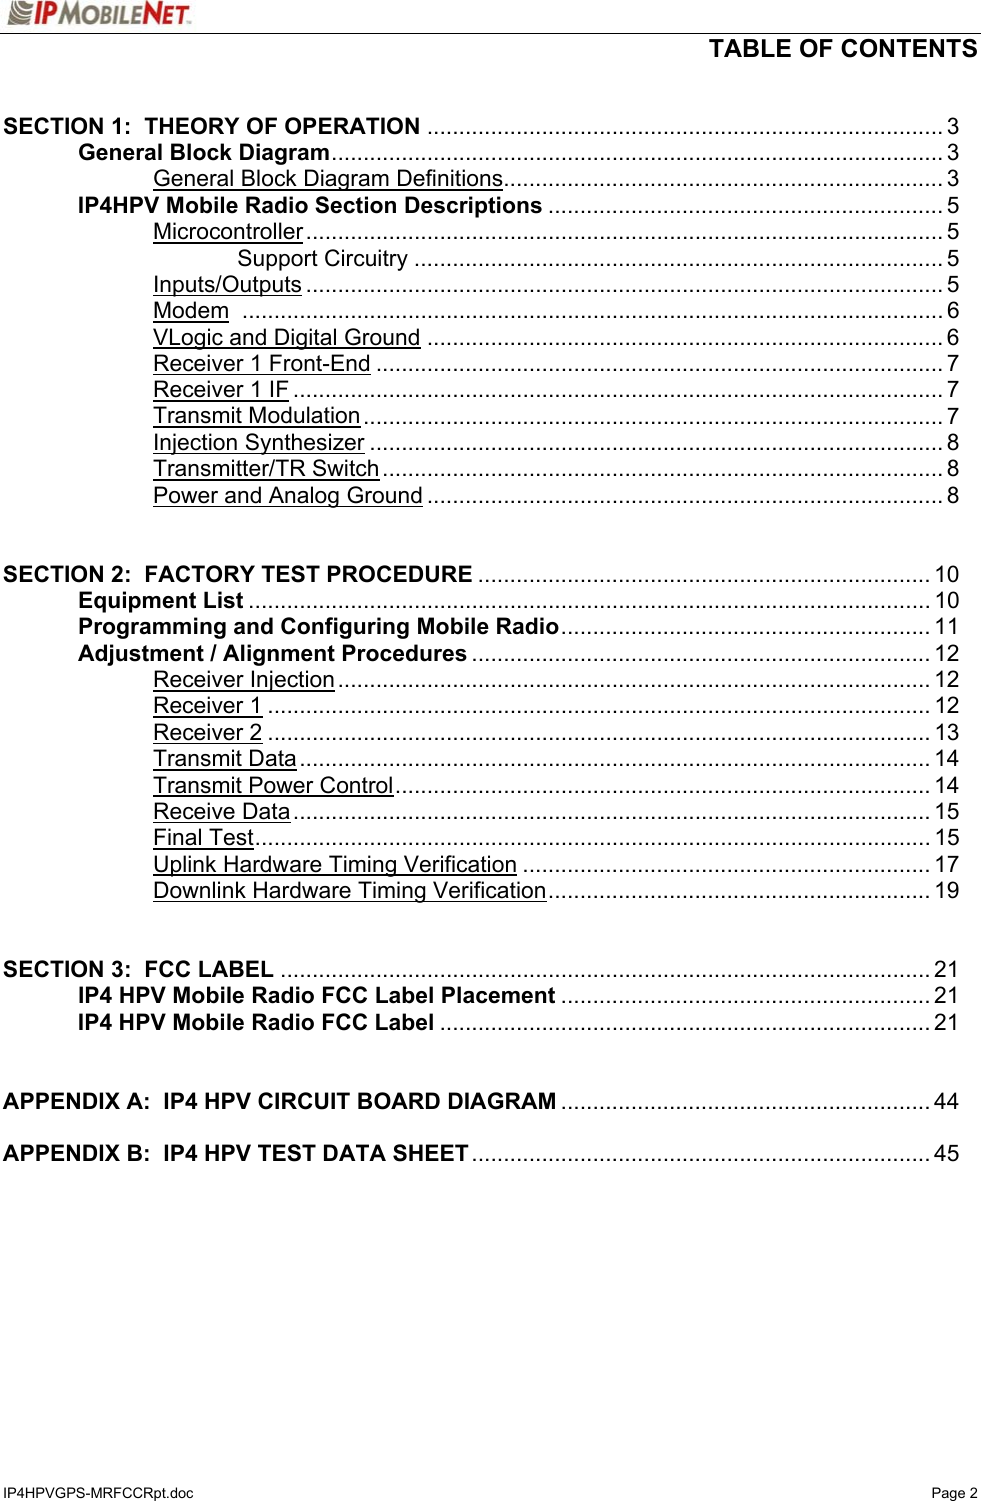   TABLE OF CONTENTS  IP4HPVGPS-MRFCCRpt.doc   Page 2  SECTION 1:  THEORY OF OPERATION ................................................................................. 3   General Block Diagram................................................................................................ 3     General Block Diagram Definitions..................................................................... 3  IP4HPV Mobile Radio Section Descriptions .............................................................. 5   Microcontroller.................................................................................................... 5     Support Circuitry ................................................................................... 5   Inputs/Outputs .................................................................................................... 5   Modem .............................................................................................................. 6   VLogic and Digital Ground ................................................................................. 6   Receiver 1 Front-End ......................................................................................... 7   Receiver 1 IF ...................................................................................................... 7   Transmit Modulation........................................................................................... 7   Injection Synthesizer .......................................................................................... 8   Transmitter/TR Switch........................................................................................ 8     Power and Analog Ground ................................................................................. 8   SECTION 2:  FACTORY TEST PROCEDURE ....................................................................... 10  Equipment List ........................................................................................................... 10   Programming and Configuring Mobile Radio.......................................................... 11   Adjustment / Alignment Procedures ........................................................................ 12   Receiver Injection............................................................................................. 12   Receiver 1........................................................................................................ 12   Receiver 2........................................................................................................ 13   Transmit Data................................................................................................... 14   Transmit Power Control.................................................................................... 14   Receive Data.................................................................................................... 15   Final Test.......................................................................................................... 15     Uplink Hardware Timing Verification ................................................................ 17     Downlink Hardware Timing Verification............................................................ 19   SECTION 3:  FCC LABEL ...................................................................................................... 21   IP4 HPV Mobile Radio FCC Label Placement .......................................................... 21  IP4 HPV Mobile Radio FCC Label ............................................................................. 21   APPENDIX A:  IP4 HPV CIRCUIT BOARD DIAGRAM .......................................................... 44  APPENDIX B:  IP4 HPV TEST DATA SHEET........................................................................ 45   